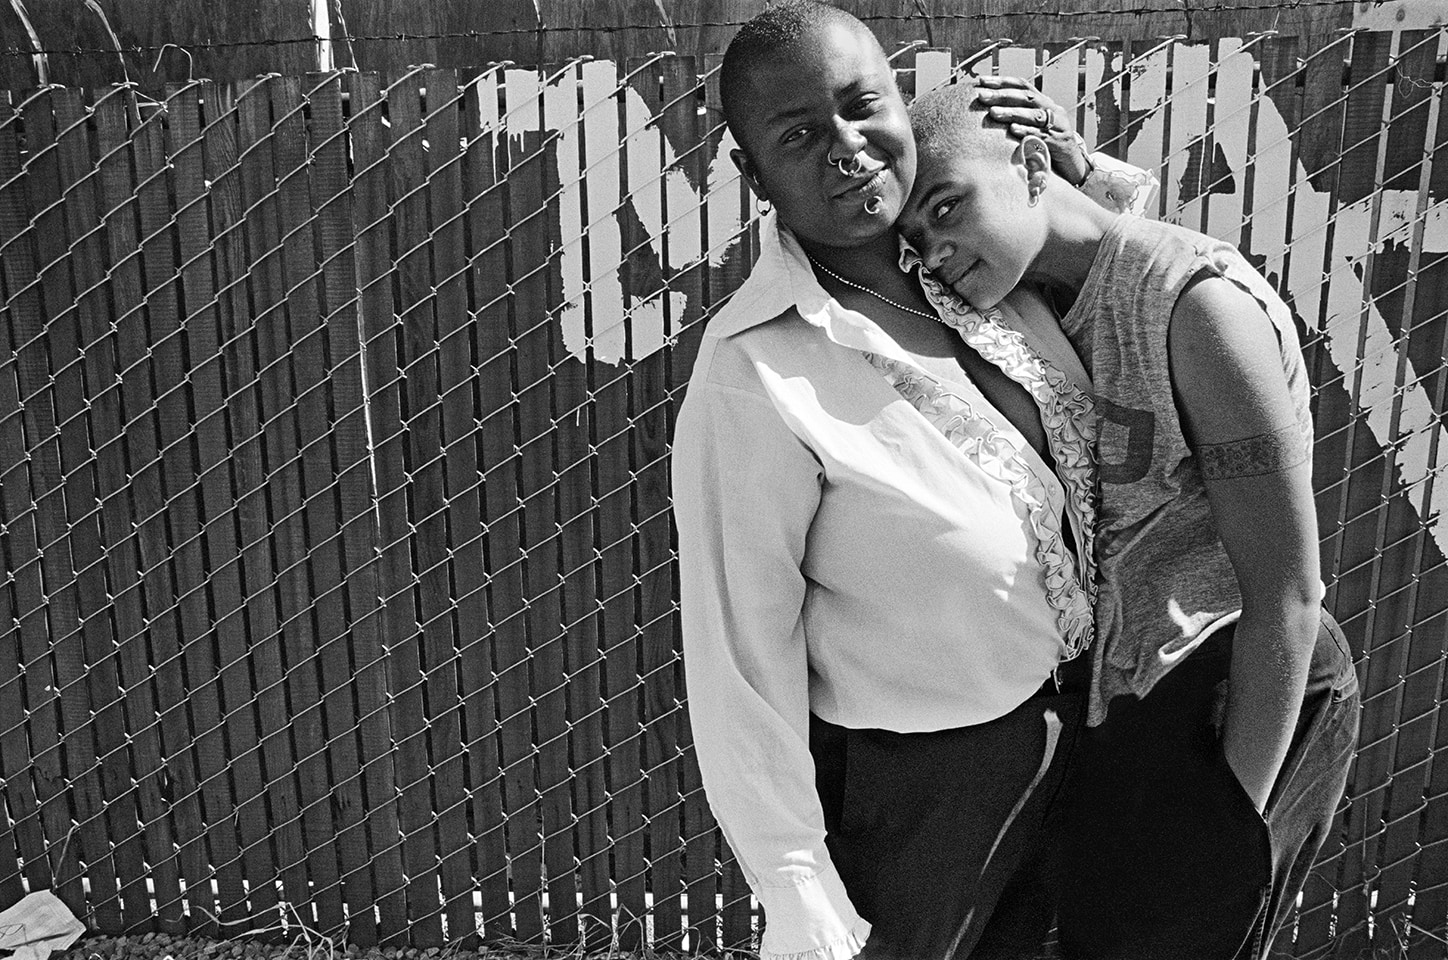 Two people with shaved heads stand in front of a chain link fence. One leans on the other, who cradles their head.